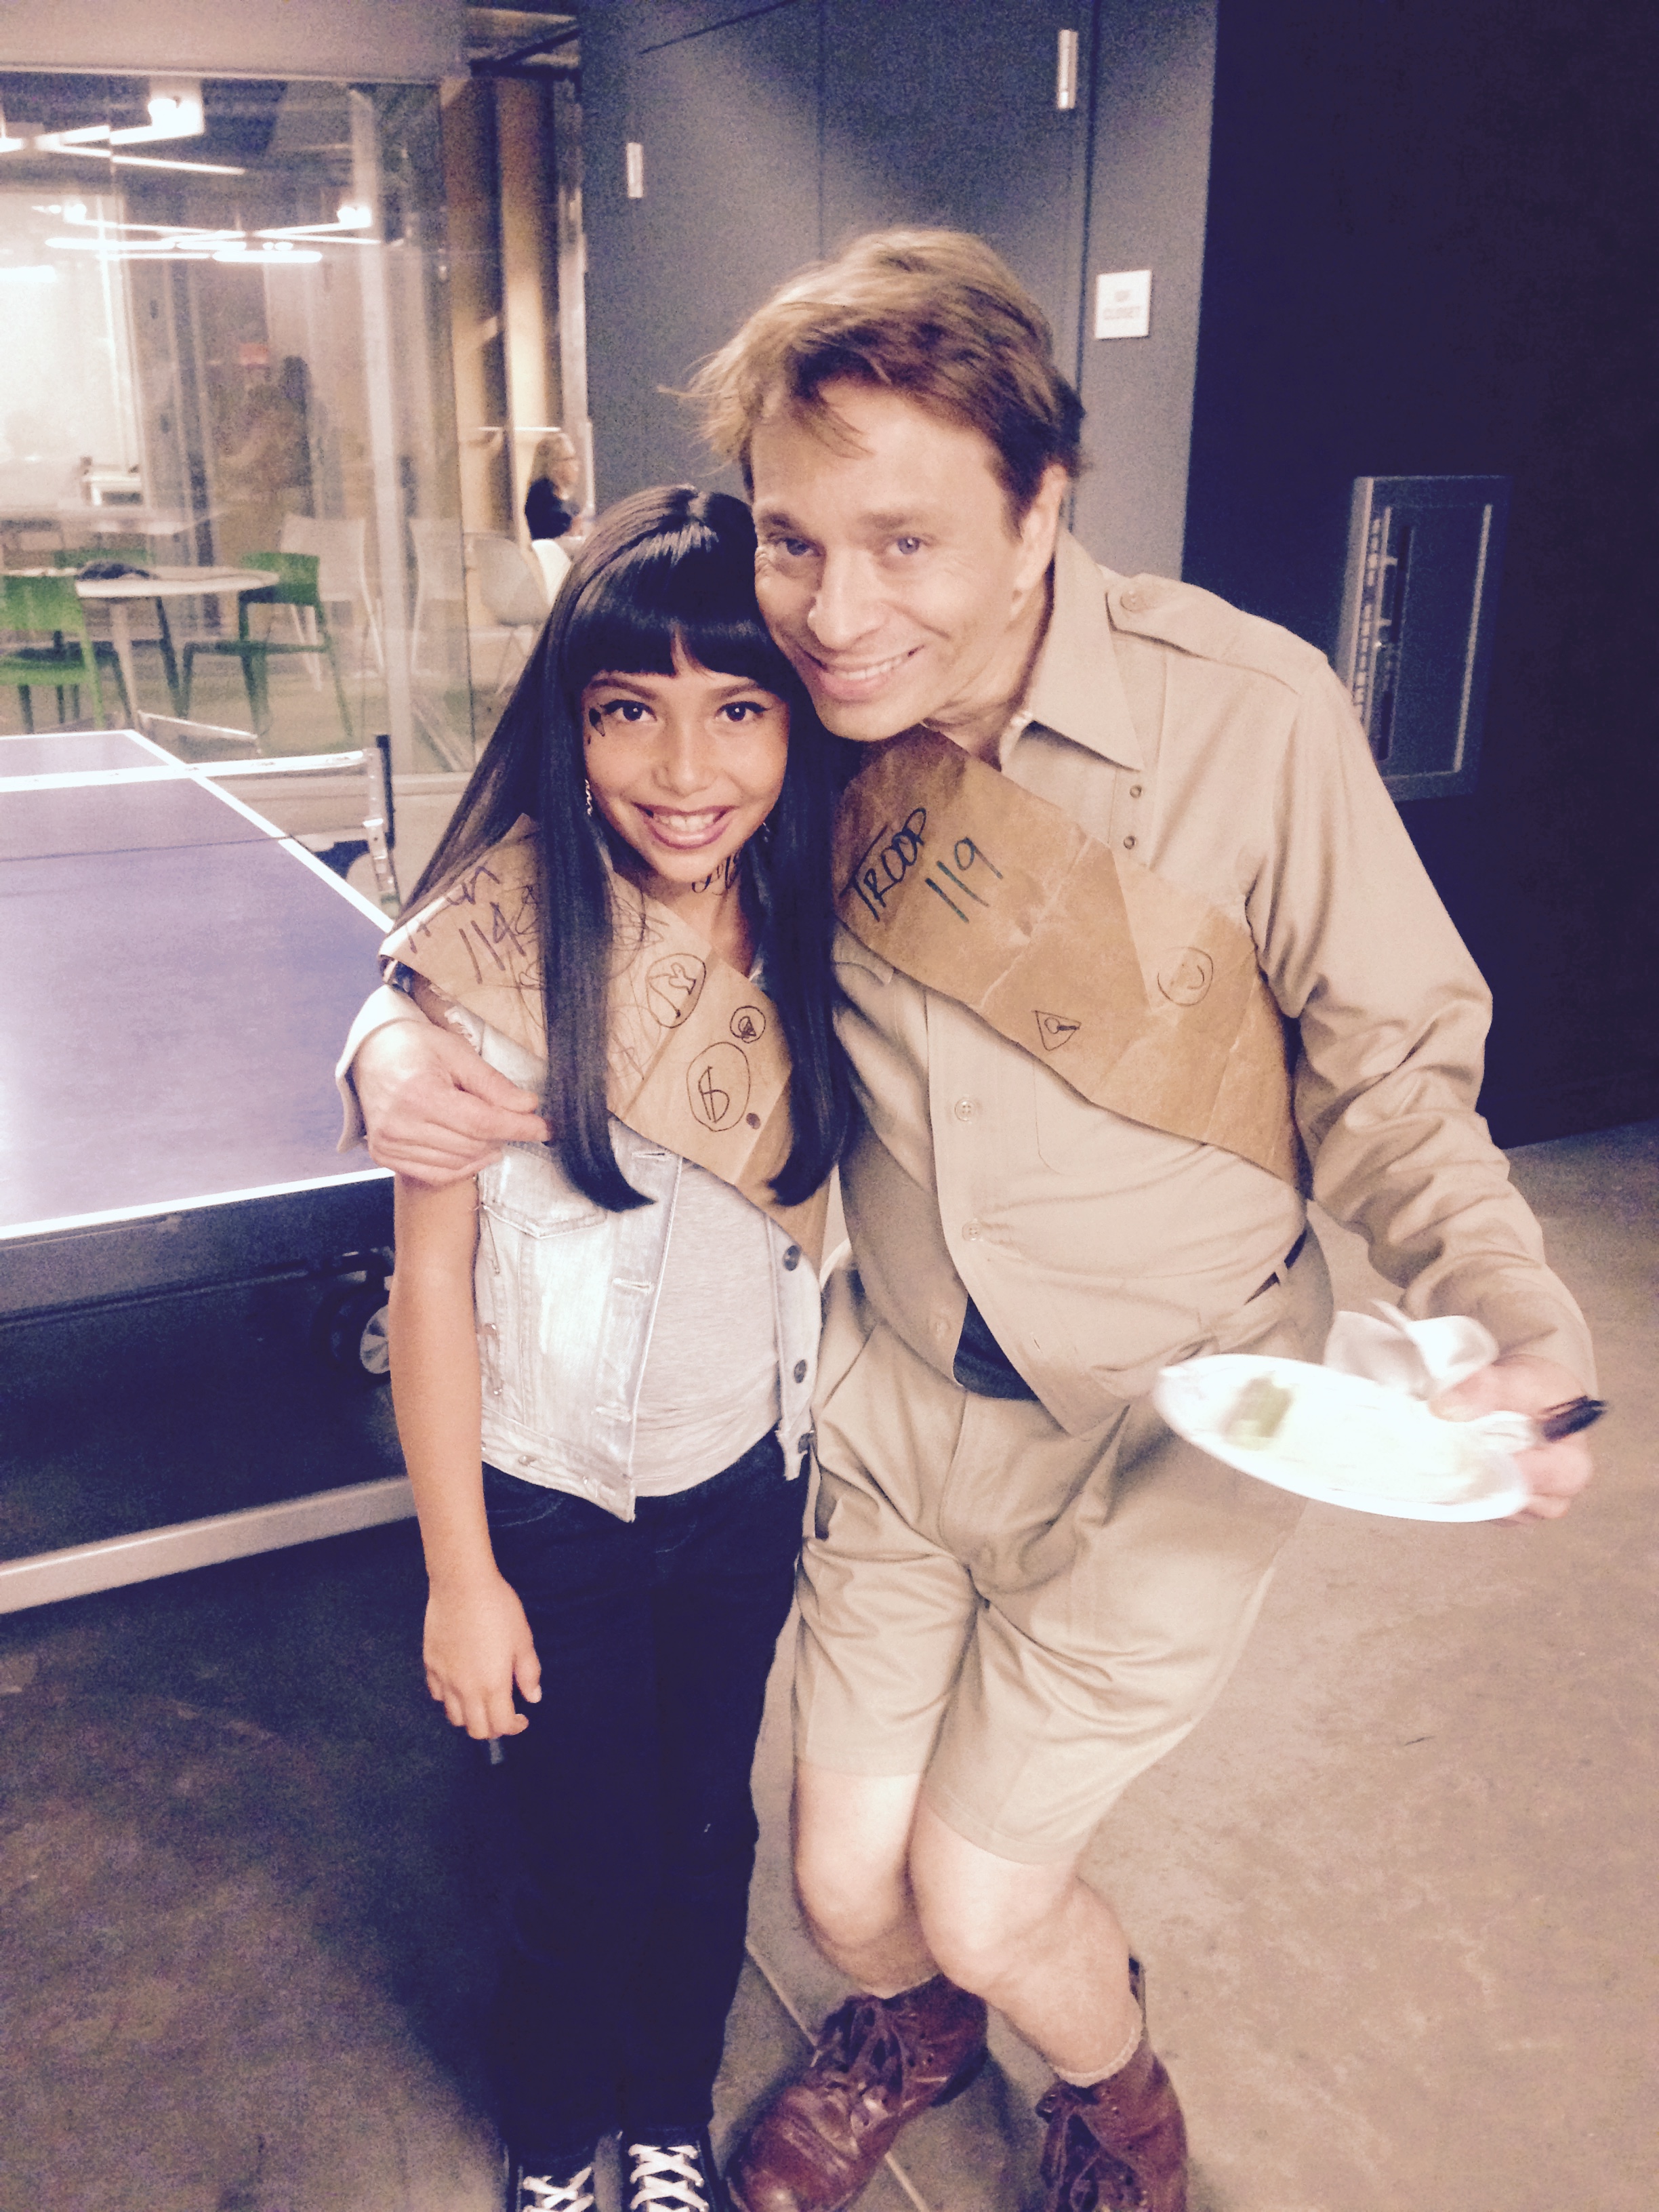 On the set of Funny or Die with Chris Kattan